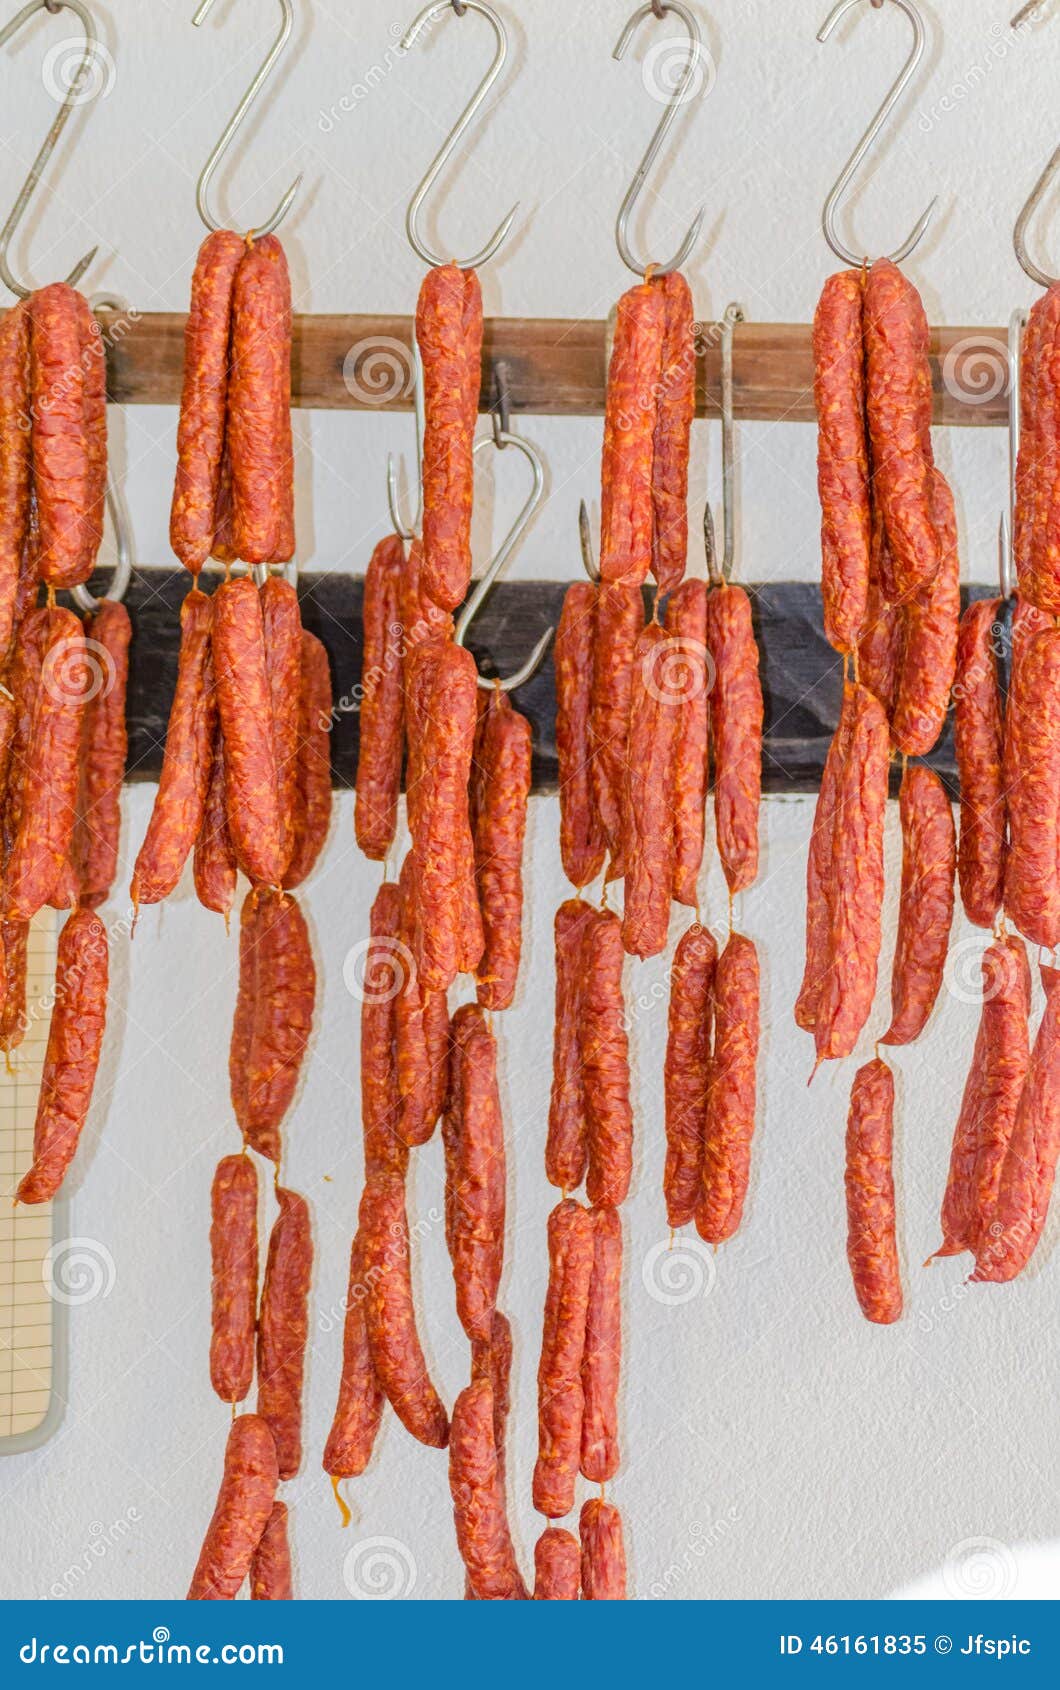 smoked sausages, meats in butcher's shop.